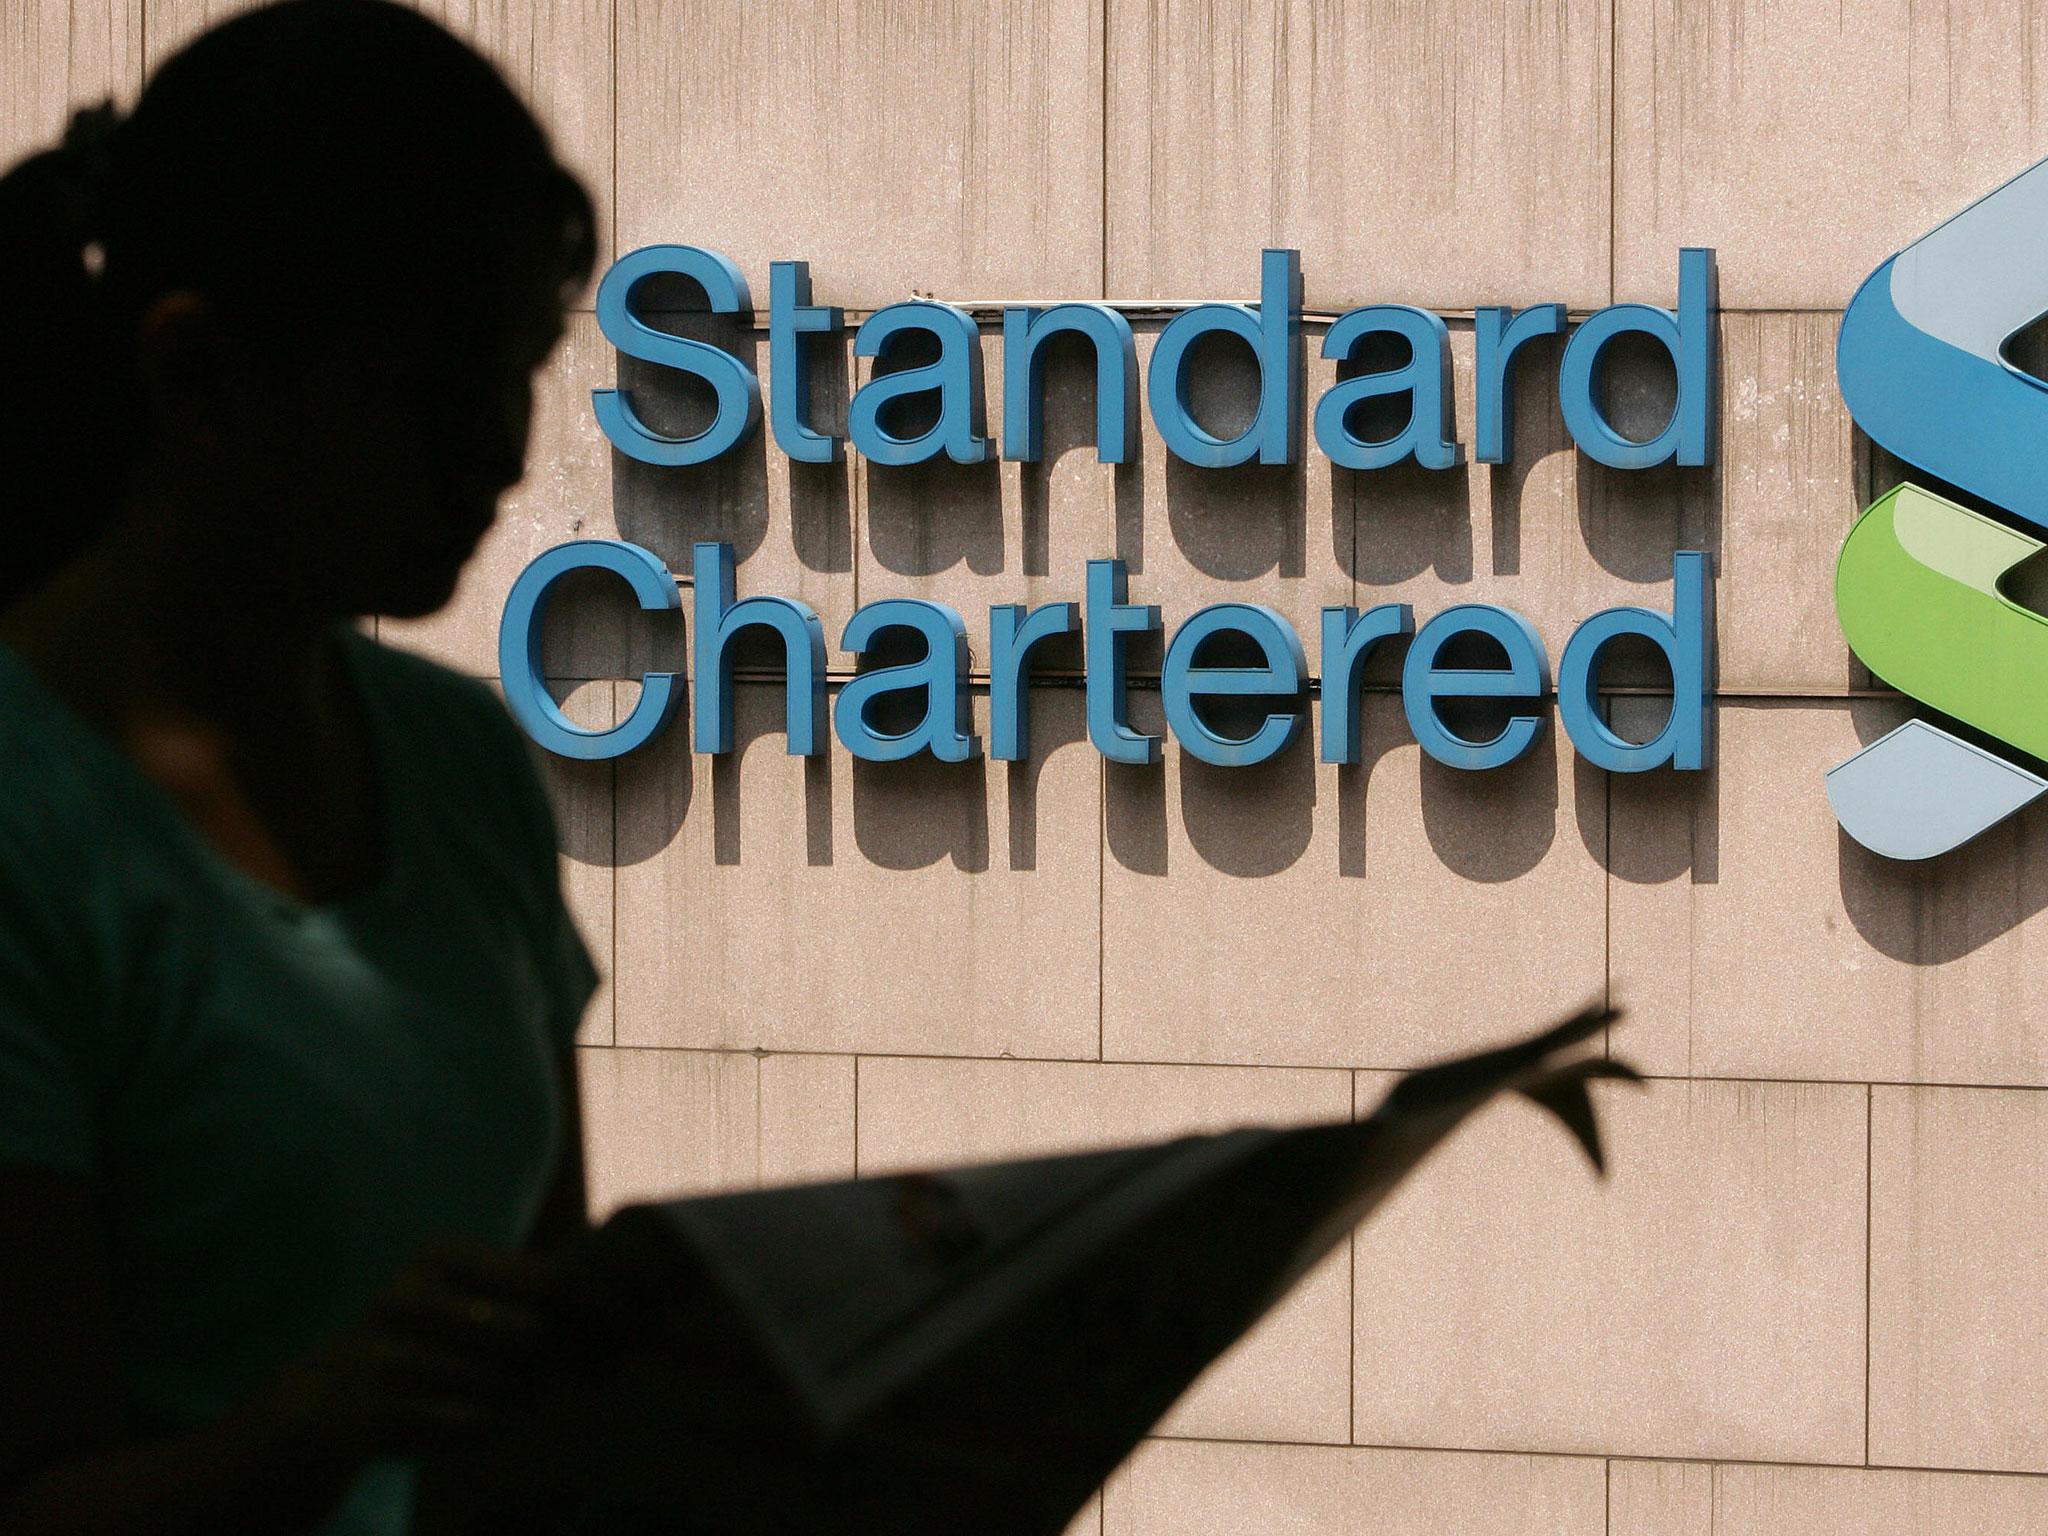 Standard Chartered has issued its first profit warning warns in a decade.